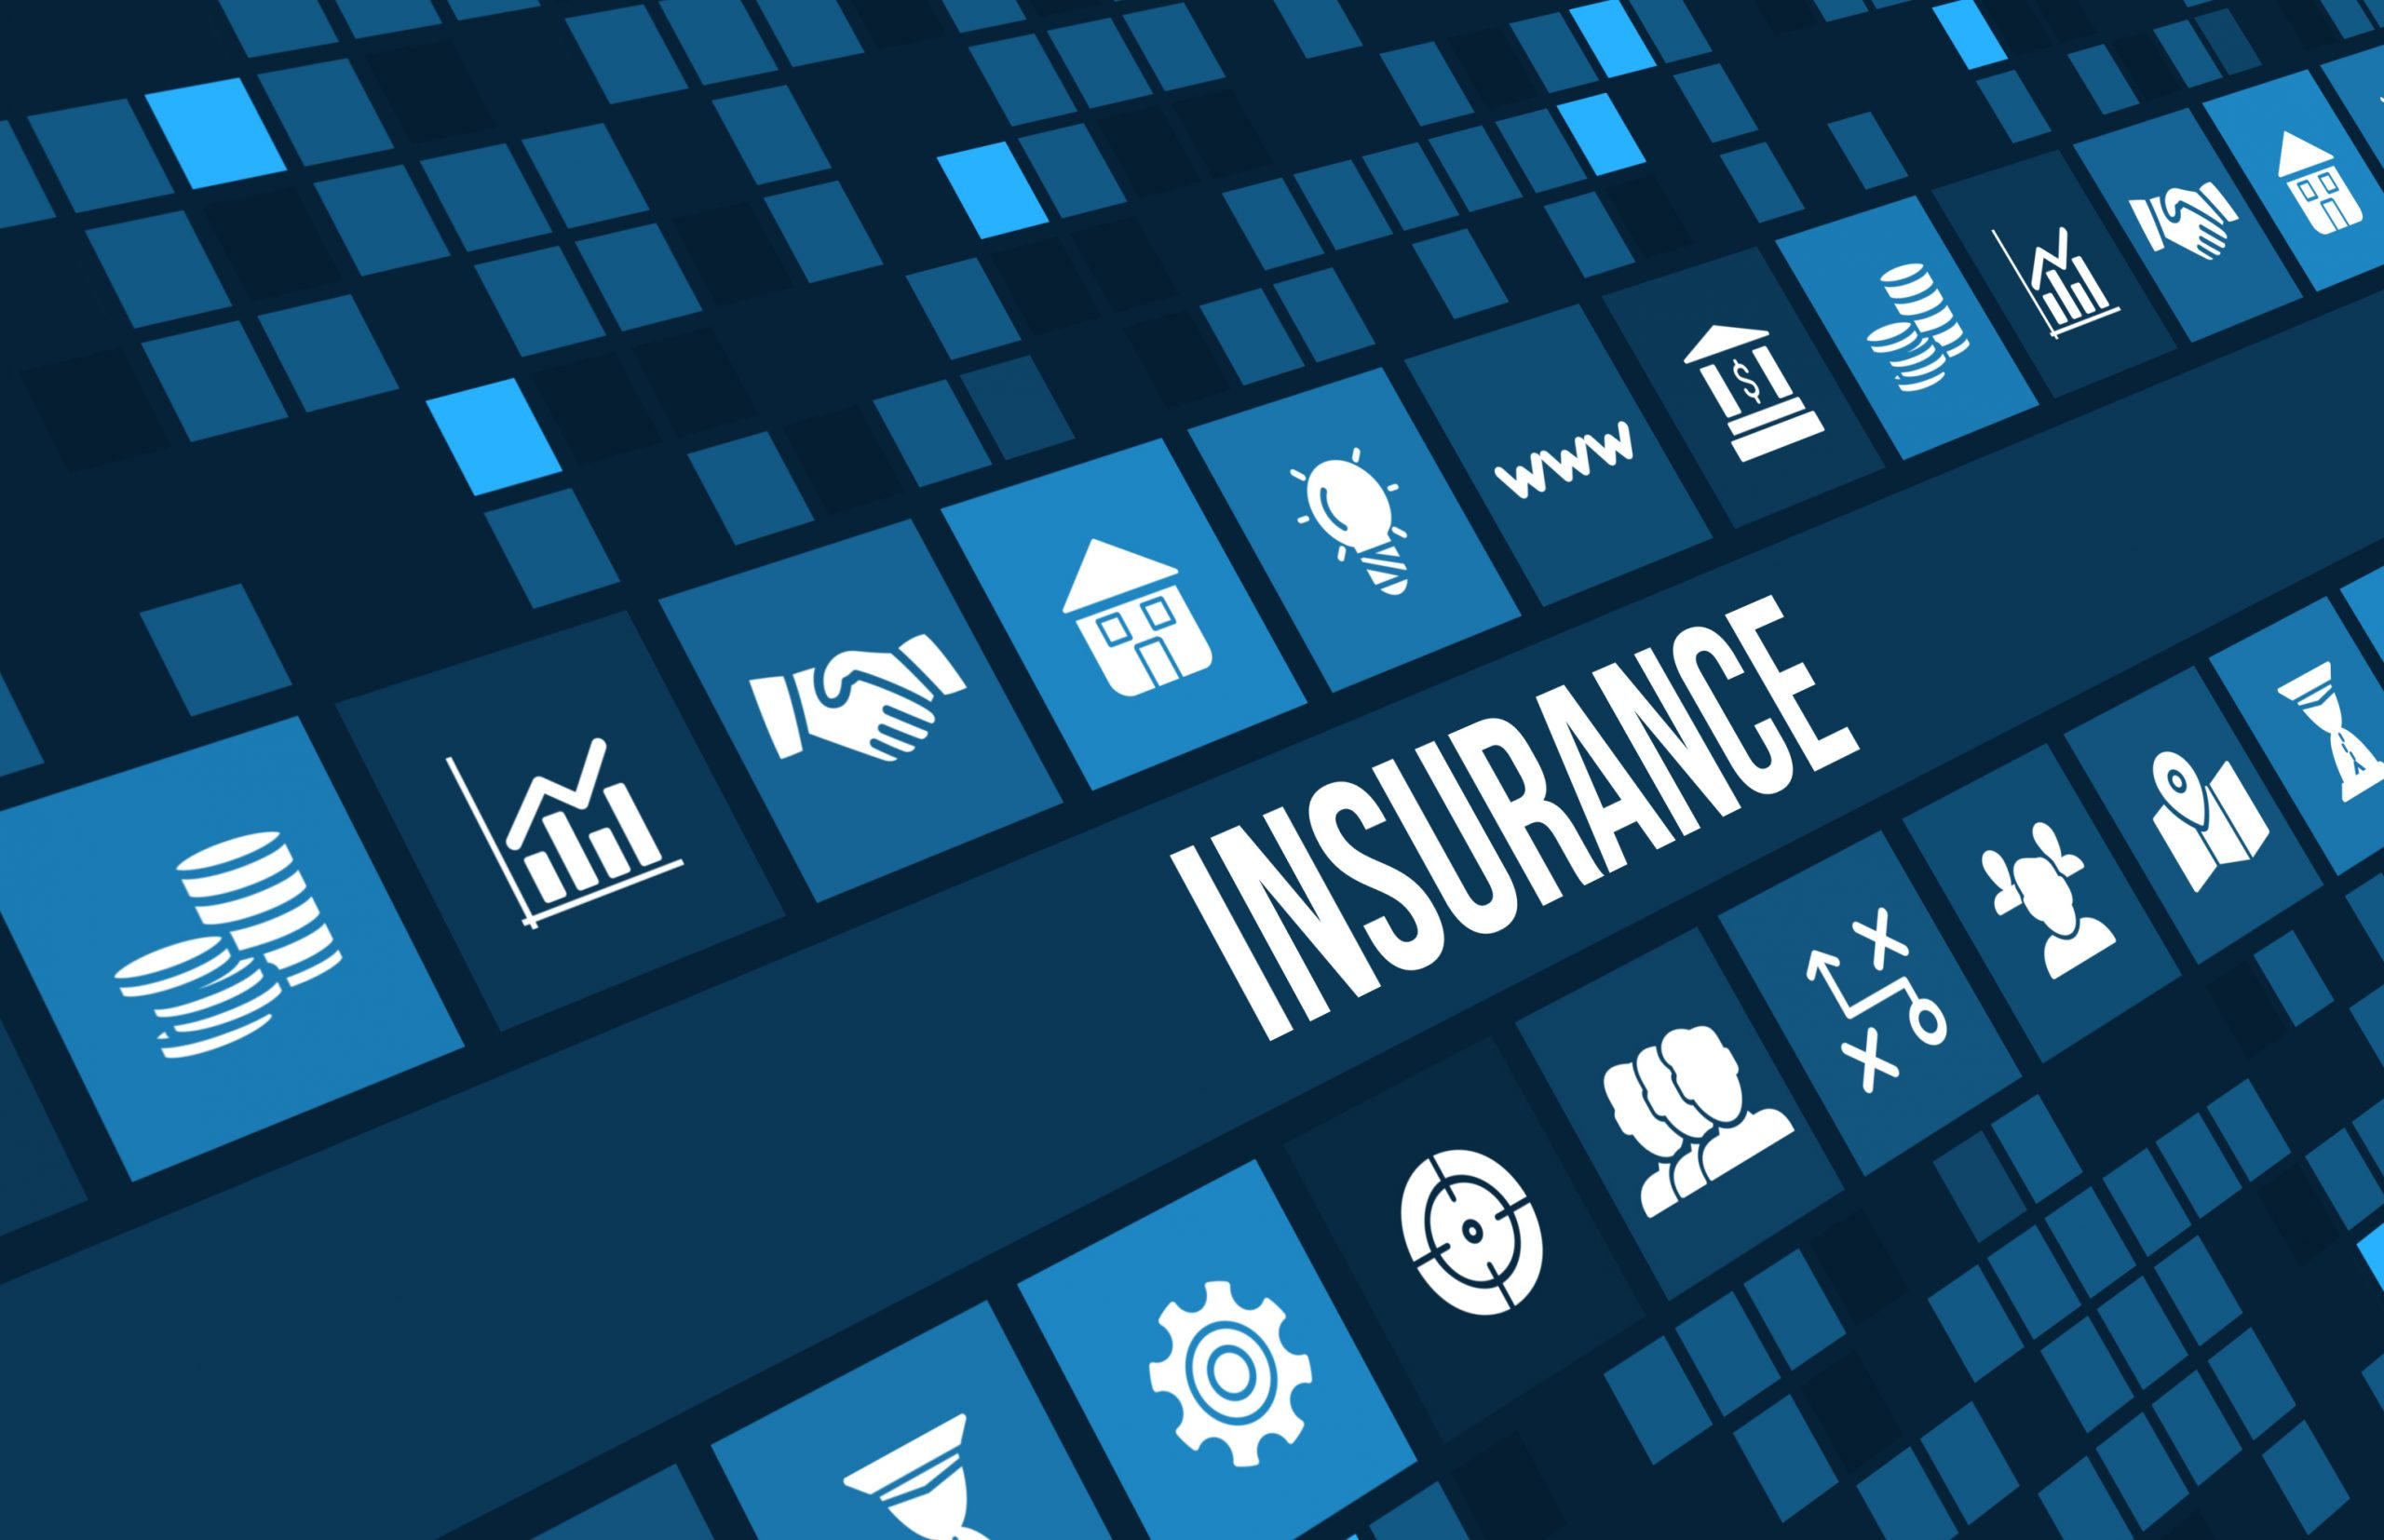 Mobile app development for the insurance company brings benefits